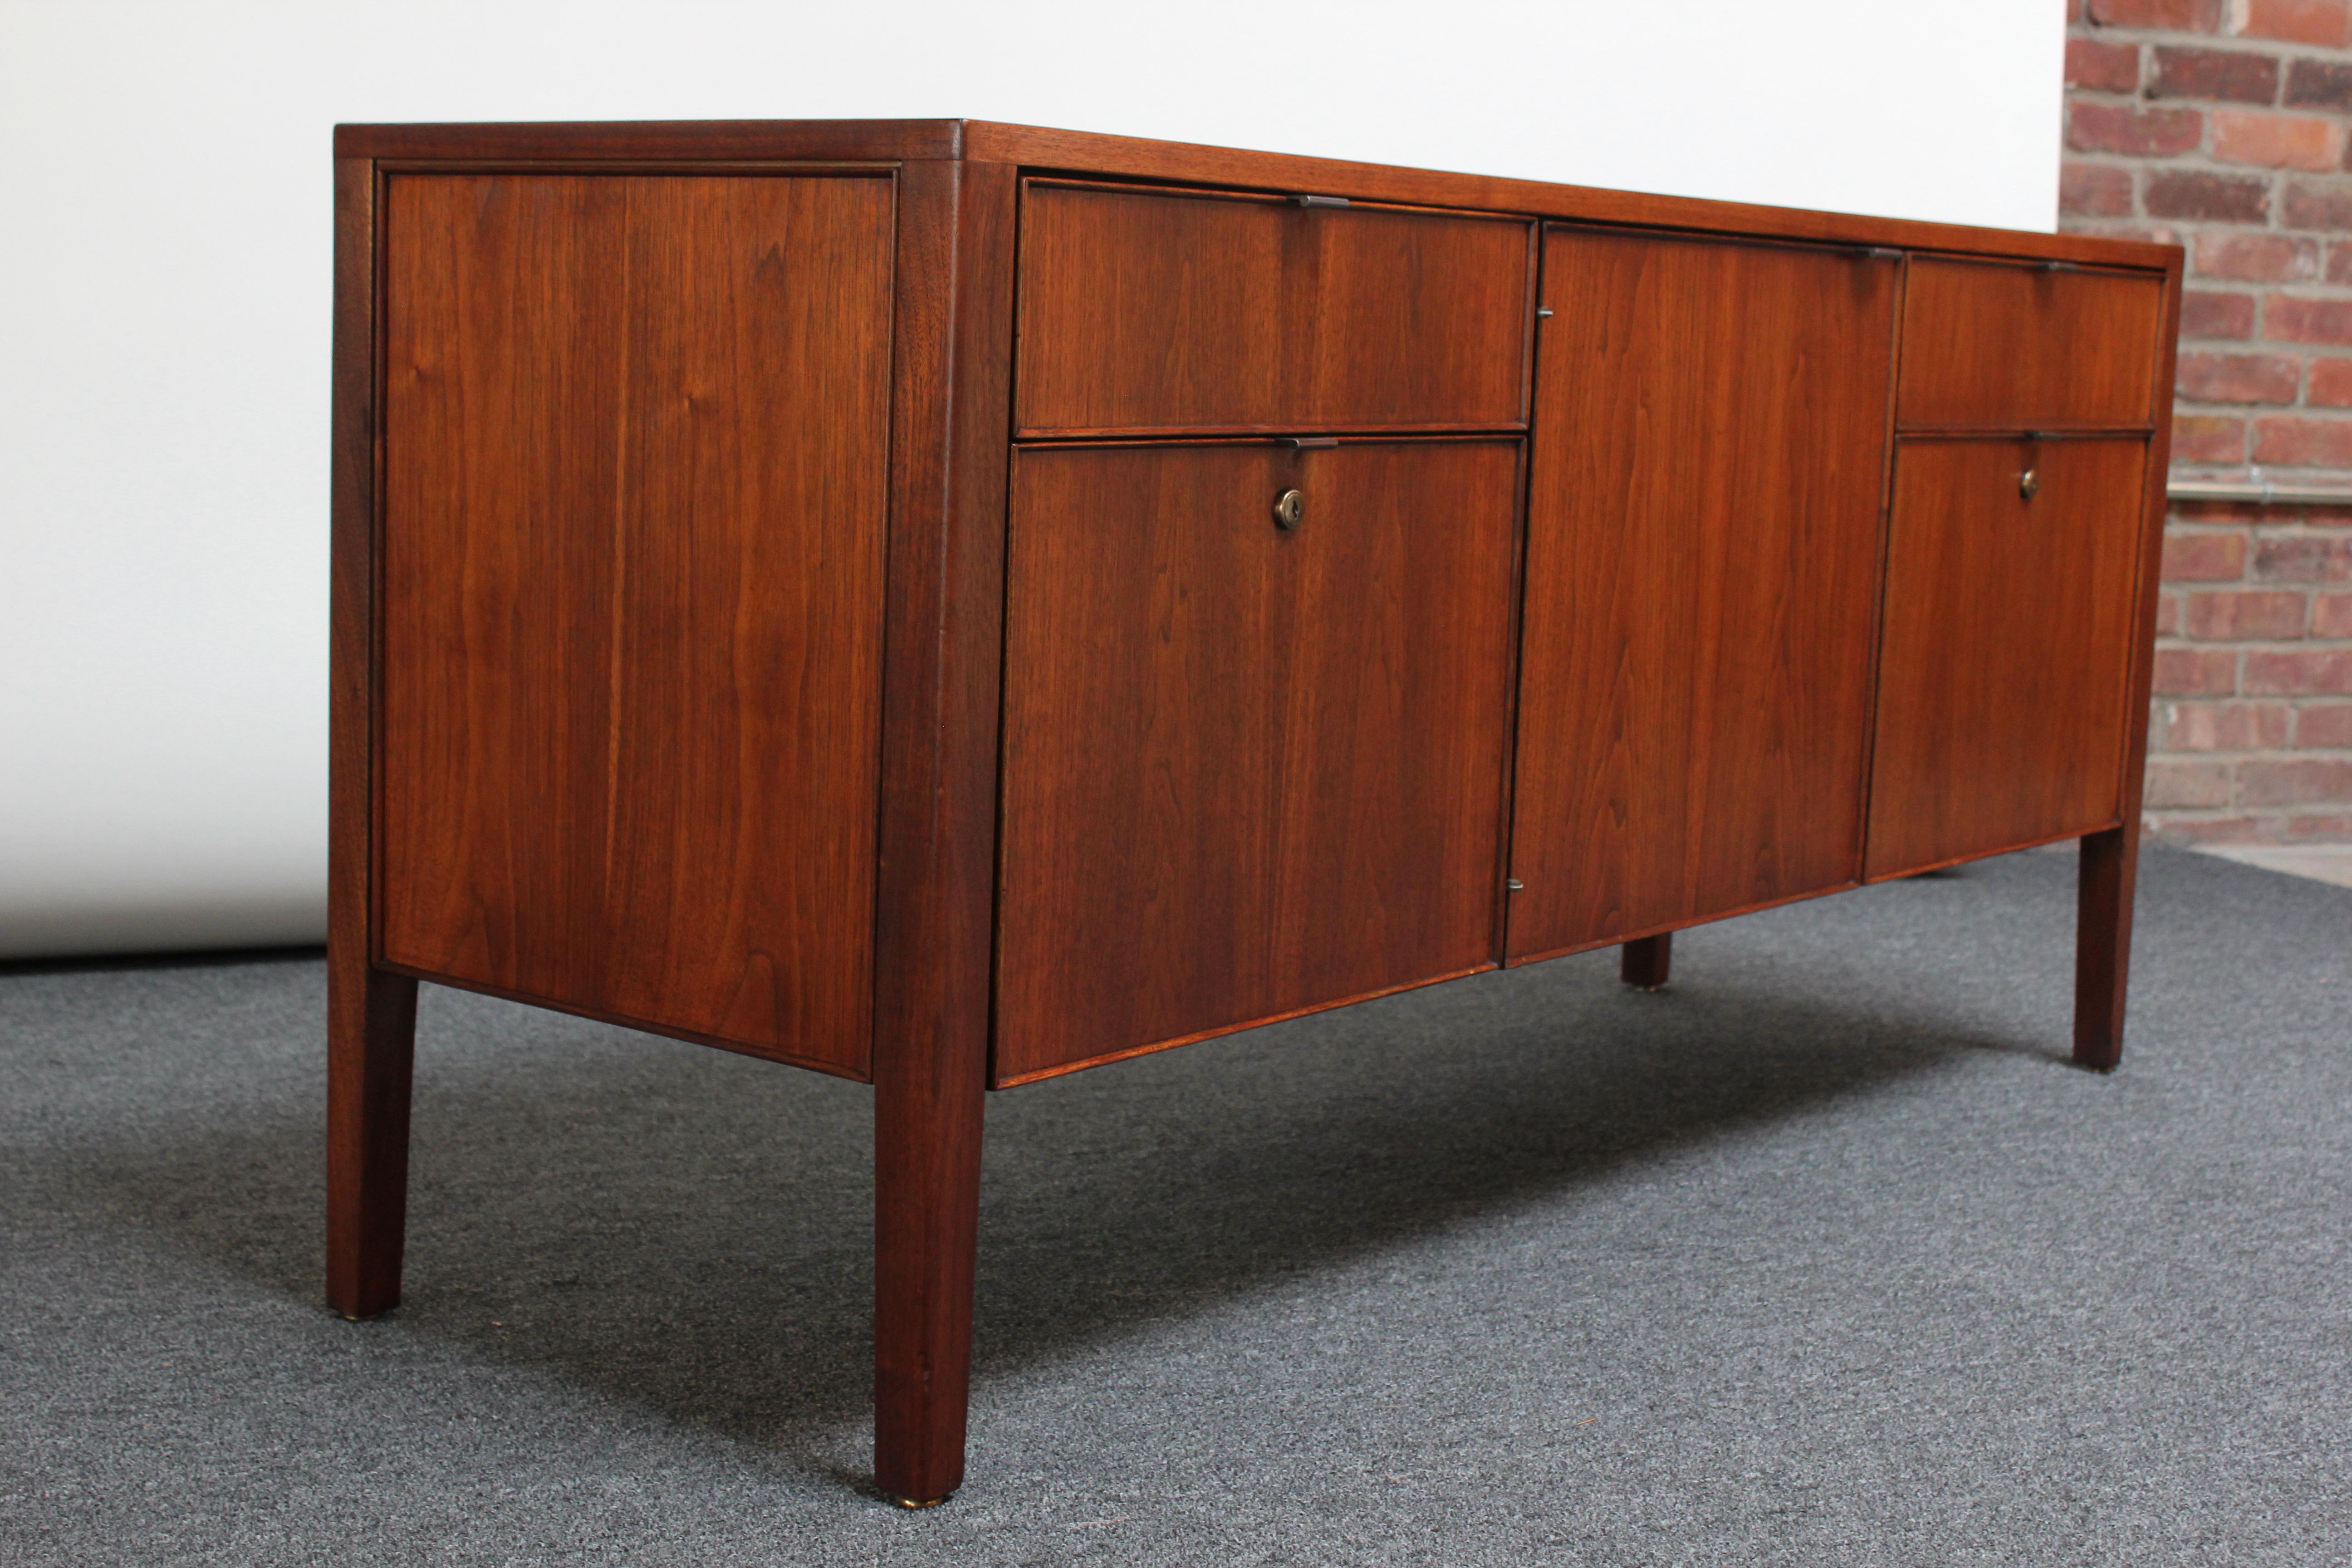 Diminutive American Modern walnut credenza By Stow Davis featuring an open storage compartment with a metal 